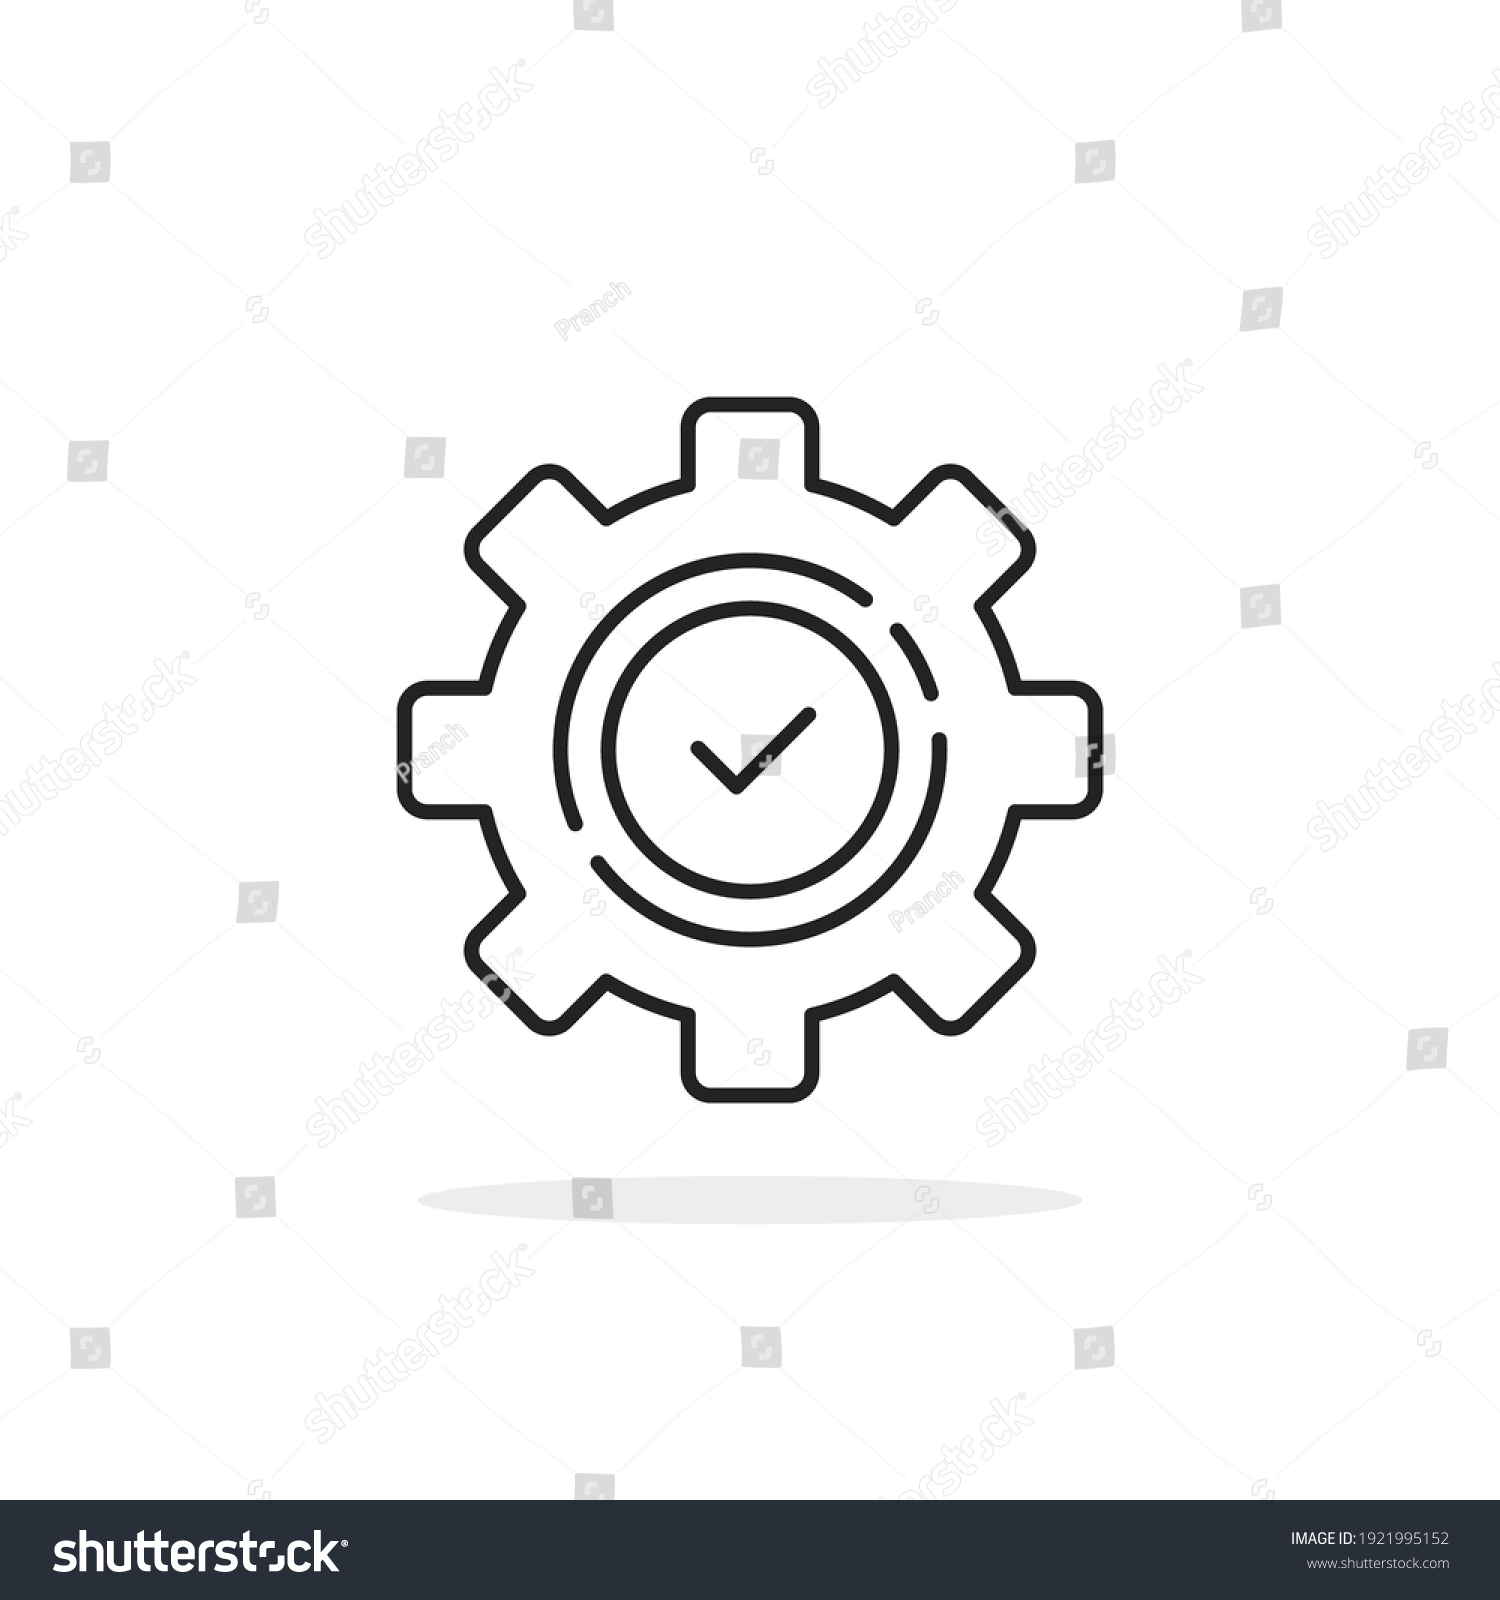 SVG of execution logo like thin line gear with checkmark. flat linear trend modern production logotype graphic stroke art design isolated on white. concept of implement productivity or problem solution svg